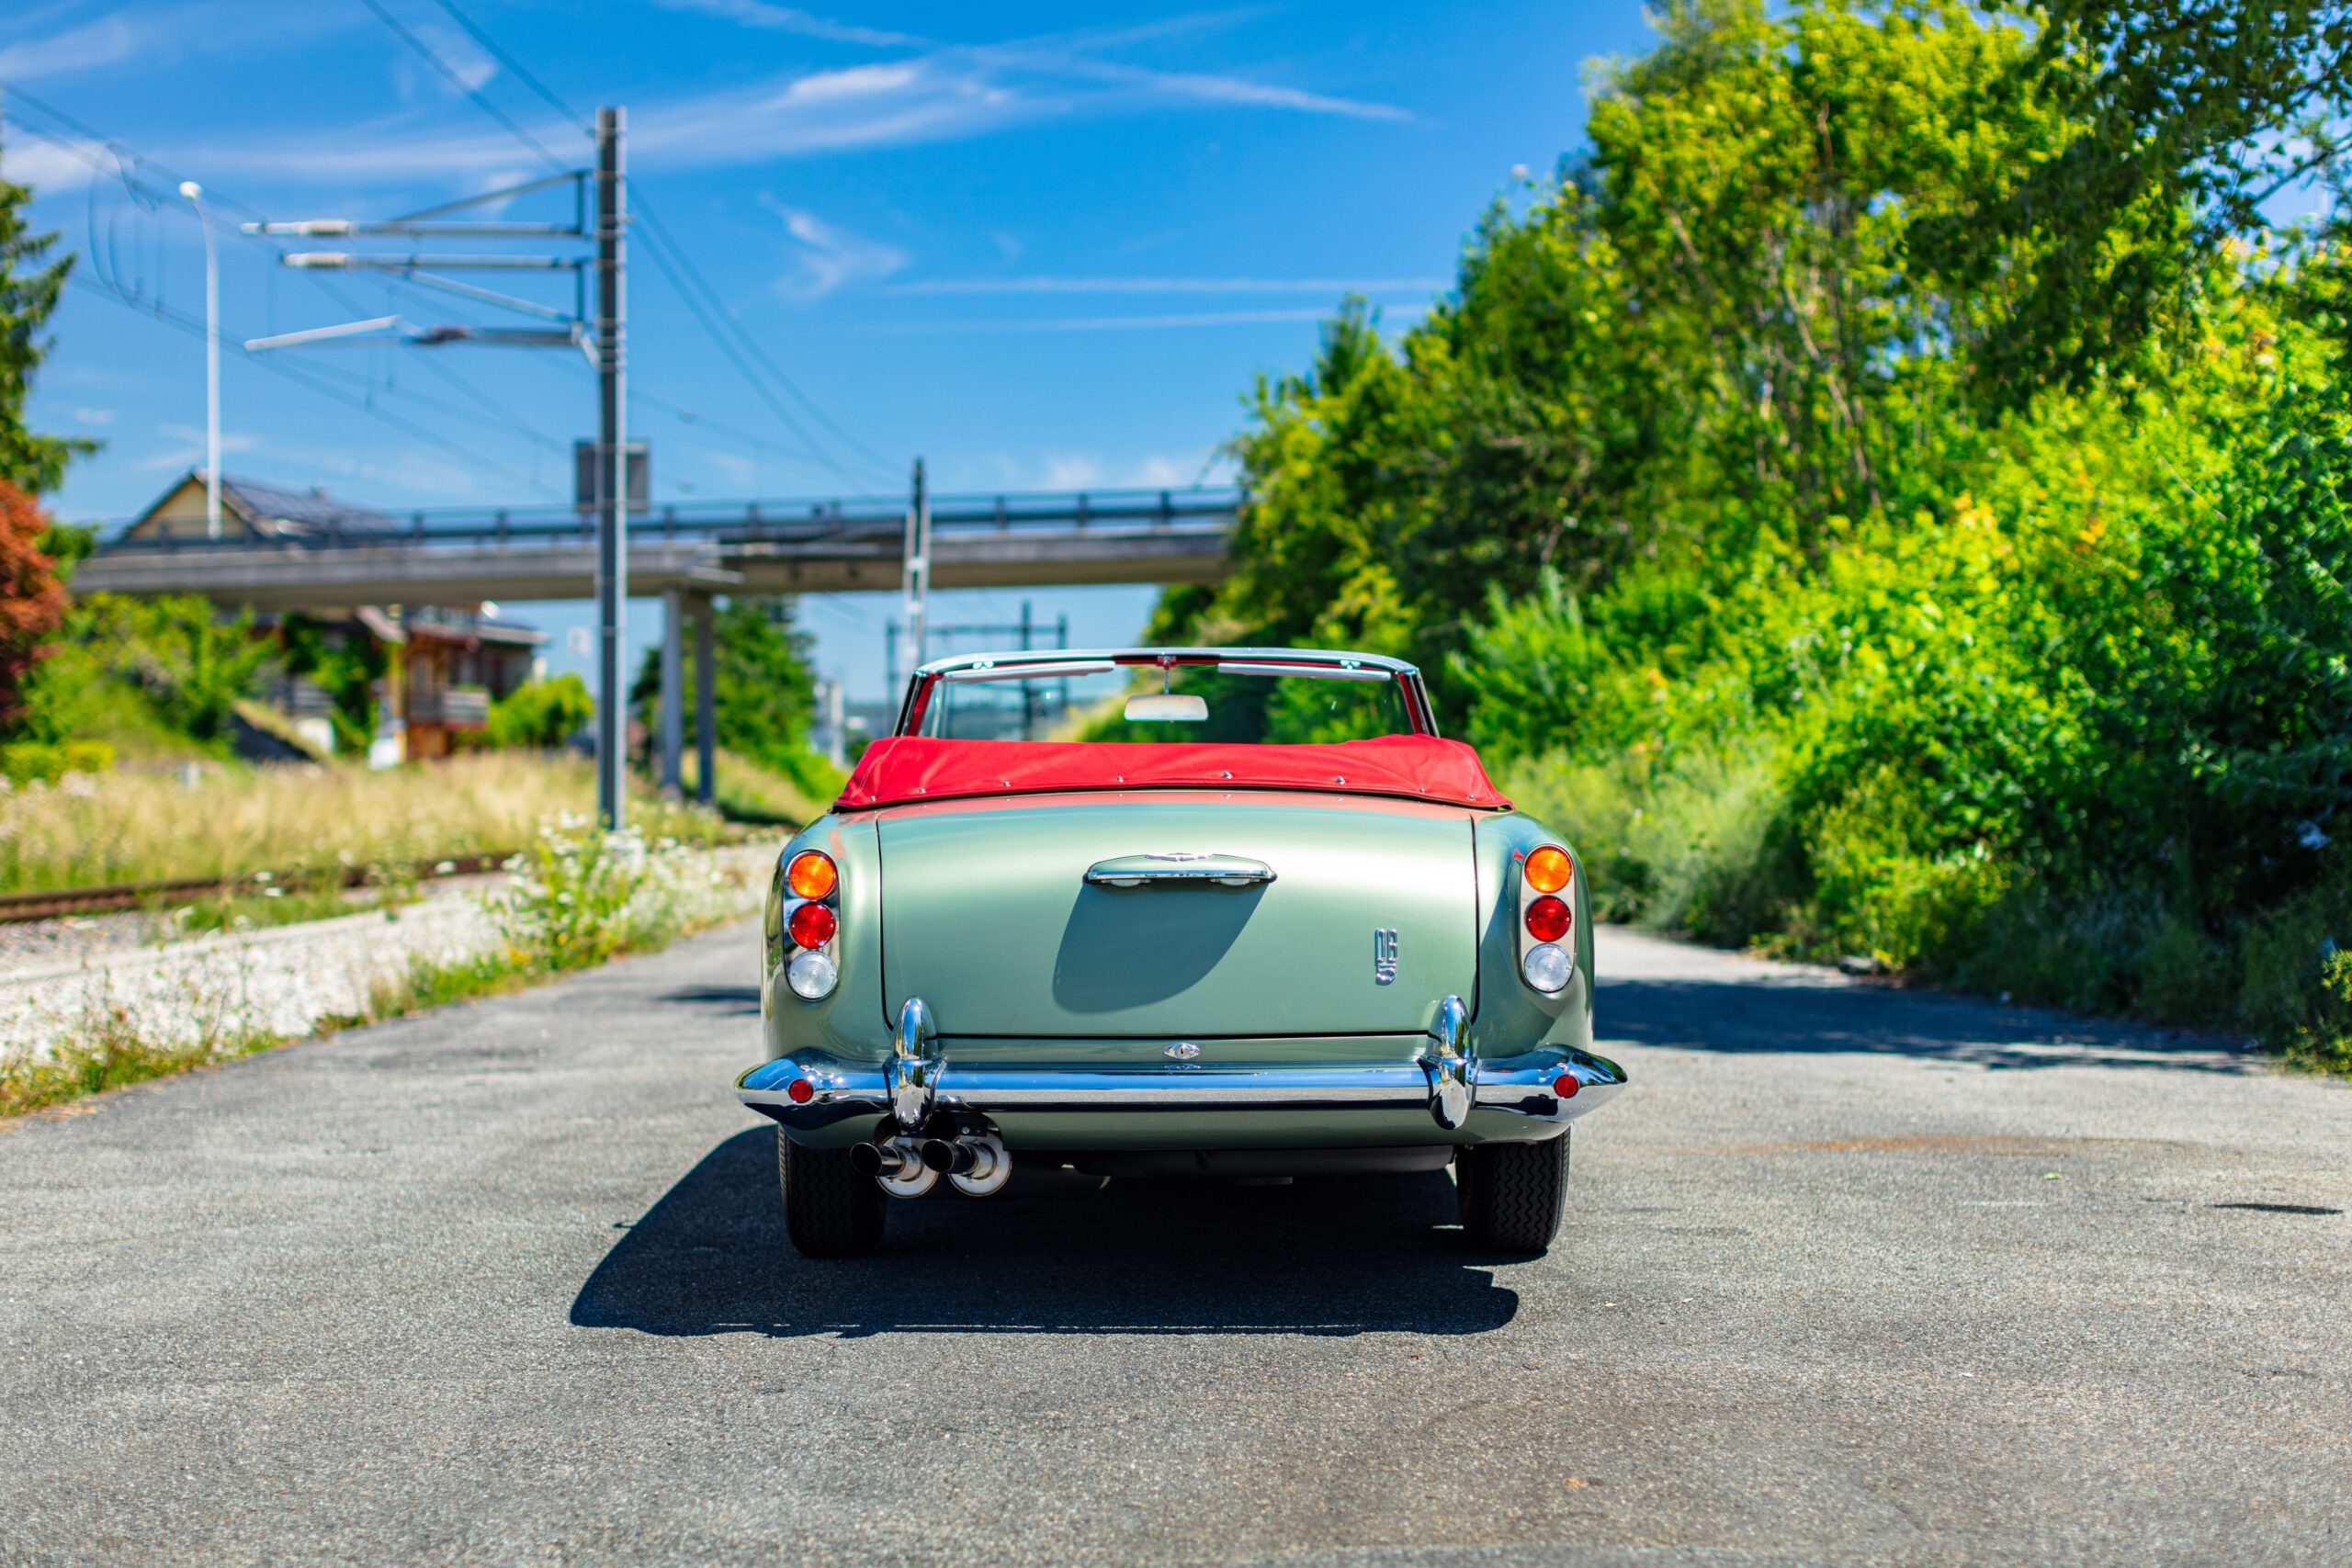 1965 Aston Martin DB5 Convertible Kevin Van Campenhout ©2022 Courtesy of RM Sotheby's